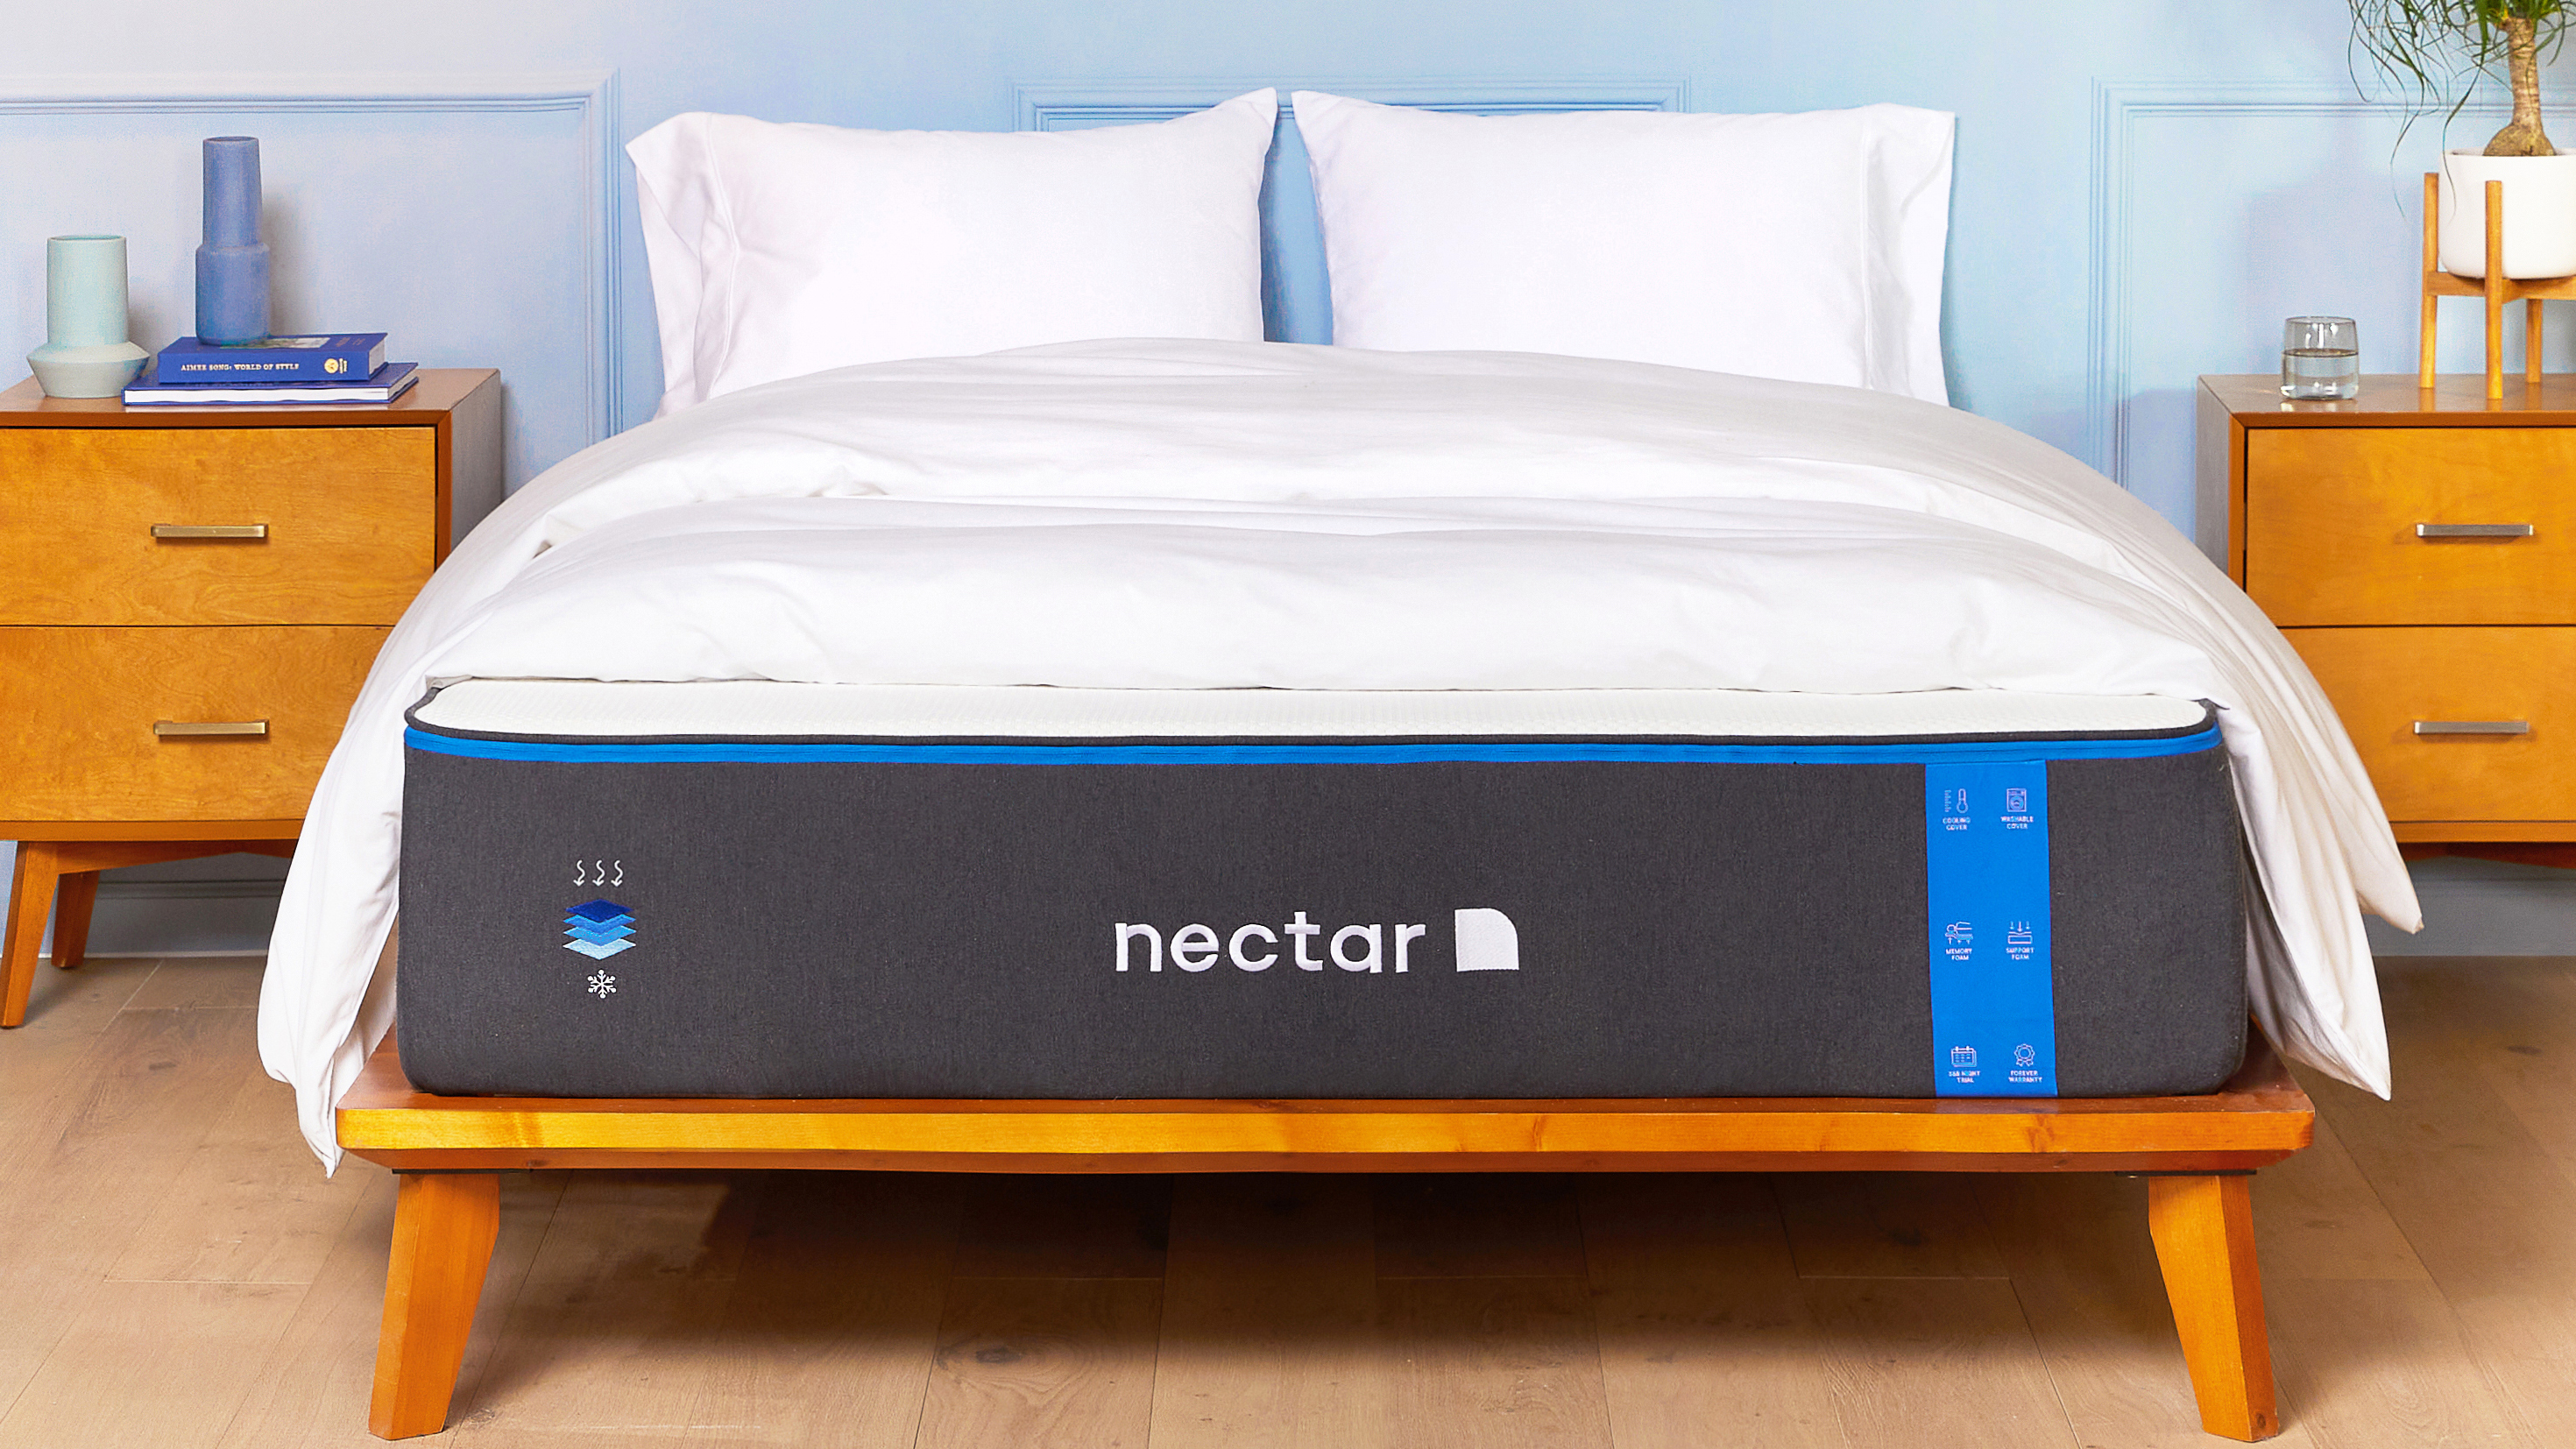 The Nectar Memory Foam Mattress placed on a light wooden bed frame and dressed with a white comforter and pillows